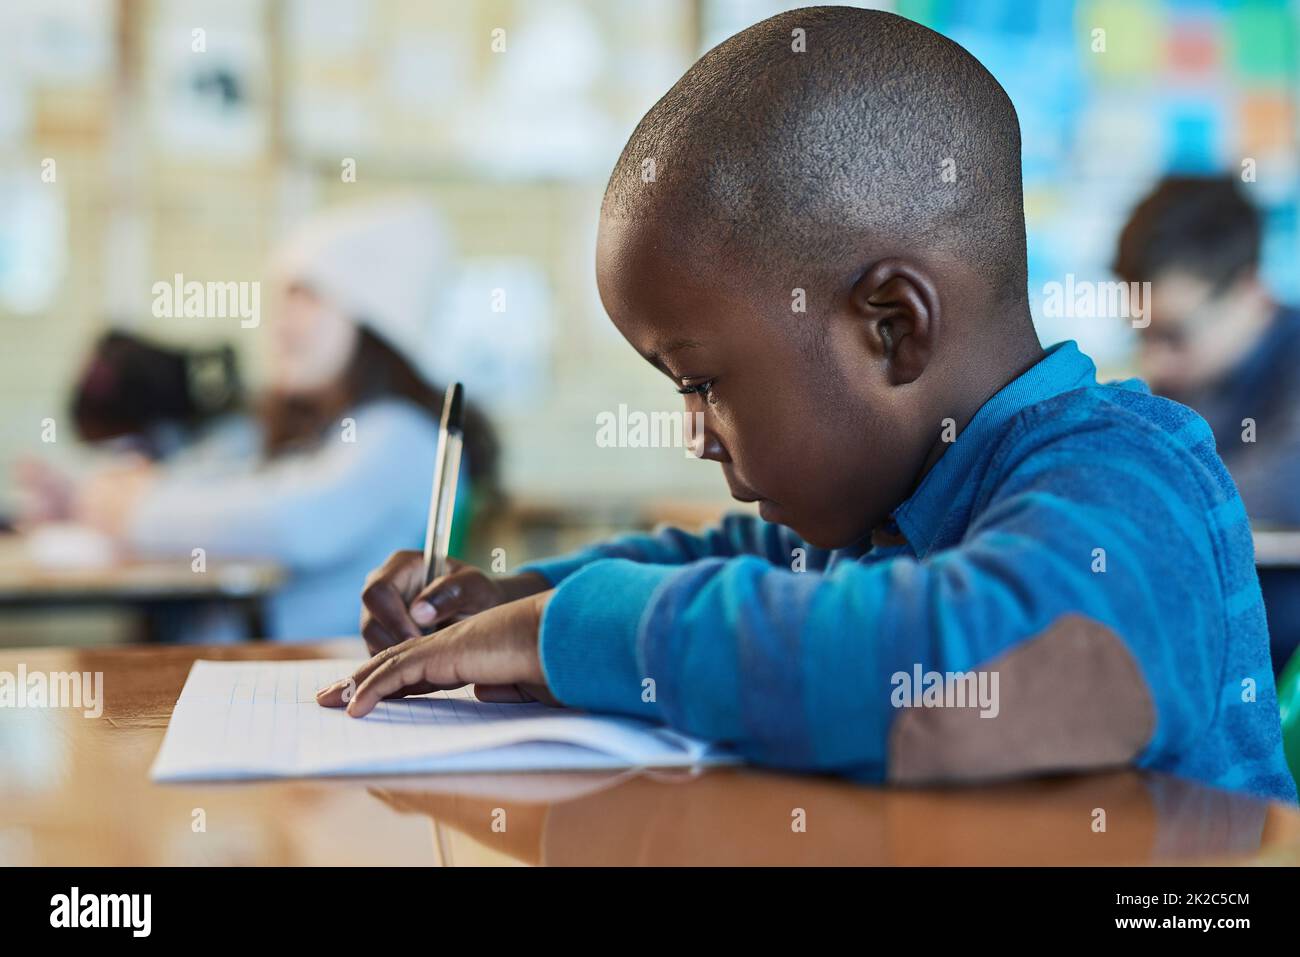 Bright young minds. Shot of an elementary school boy working in class. Stock Photo